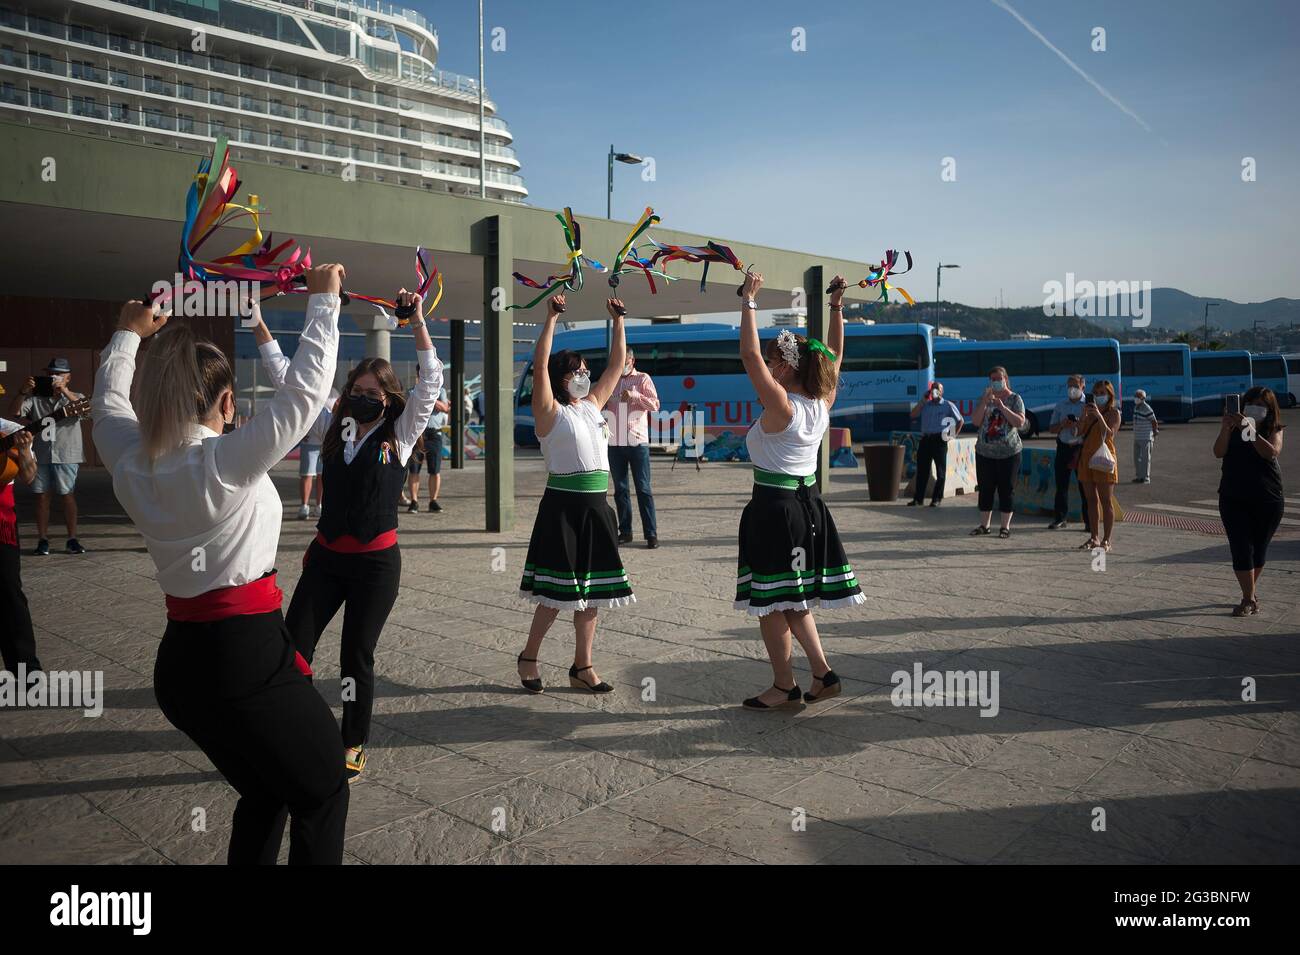 People dressed in traditional costumes rehearsing for welcoming German tourists on board the cruise ship.The German cruise ship 'Mein Shiff 2', of ship owner 'TUI cruises' arrived at Malaga Port with passengers on board after the return of international cruises to Spain. The Malaga port is the first peninsular harbor to welcome a cruise ship since the beginning of the coronavirus pandemic and mobility restrictions. More than 1000 passengers will enjoy trips to the downtown city through ‘support bubbles' groups allowing only excursions organized by TUI cruises for their travelers, as a measure Stock Photo